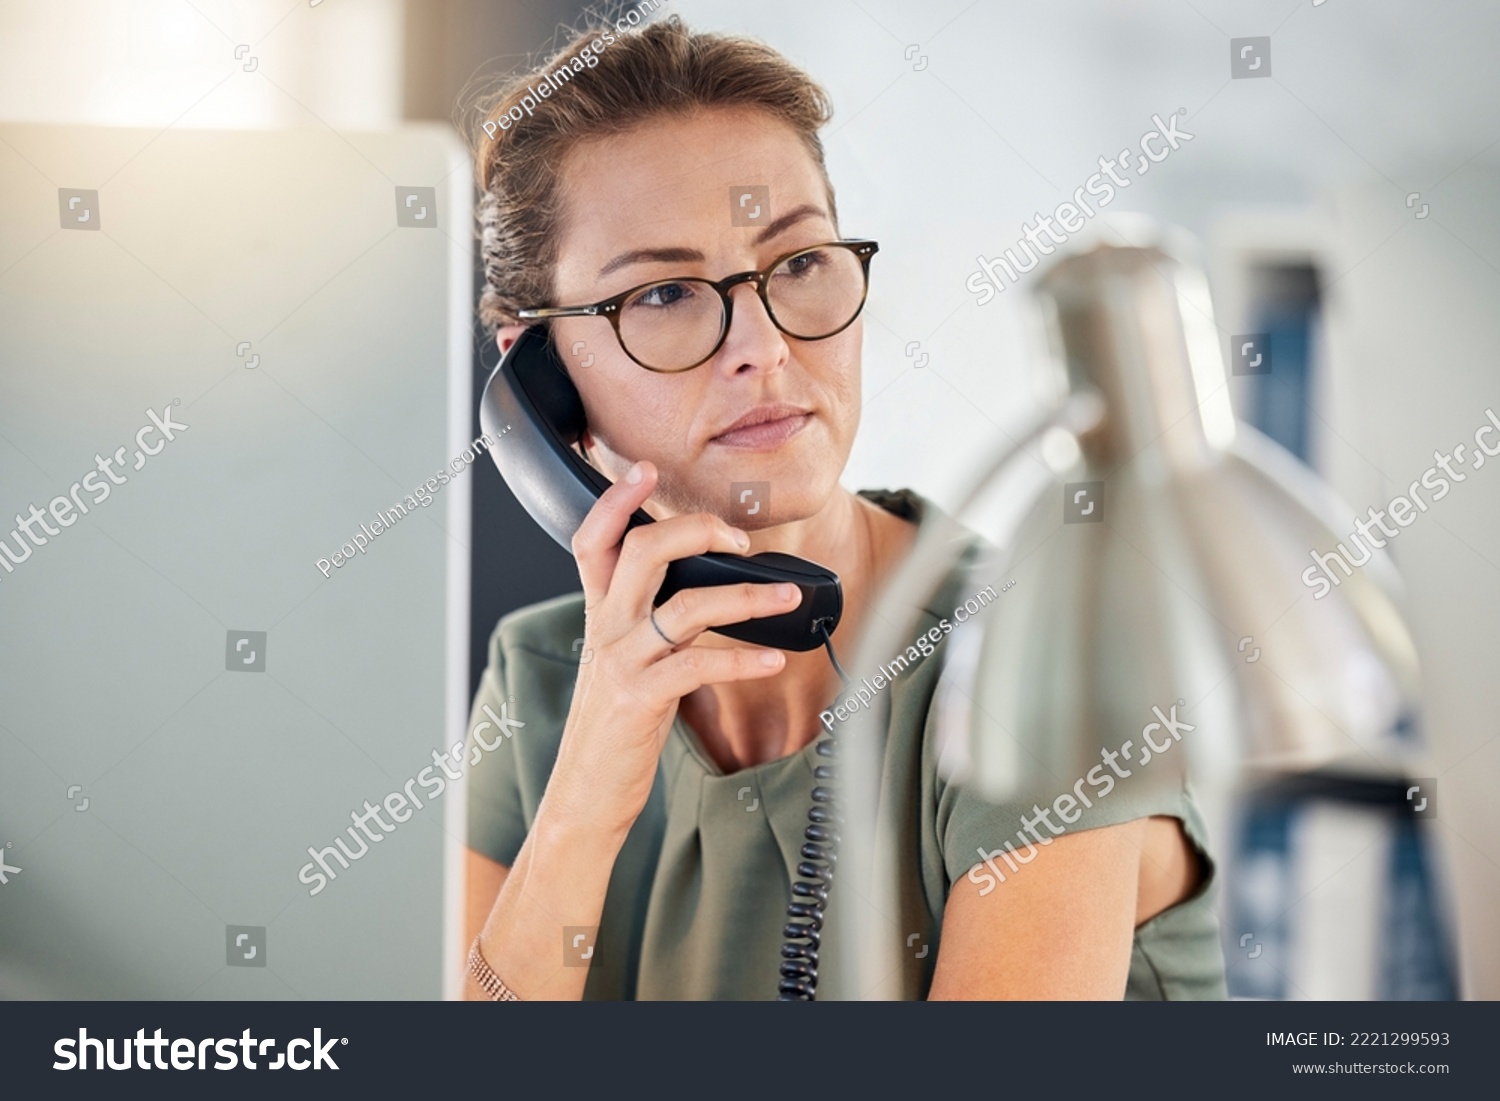 Telephone, phone call and business woman in office, talking and thinking. Landline, communication and female employee from Canada on call speaking, chatting or work discussion in company workplace. #2221299593